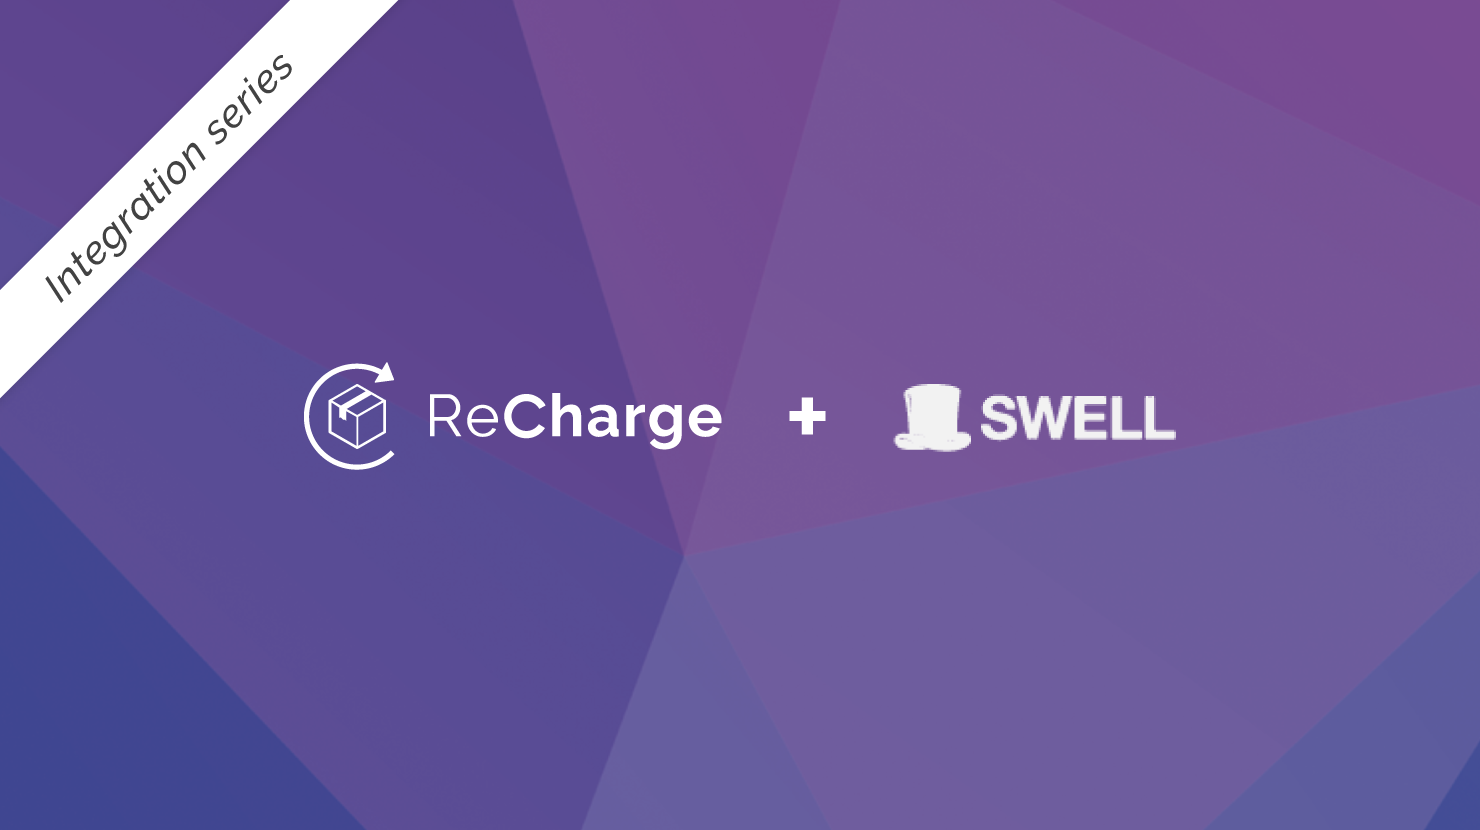 ReCharge + SWELL